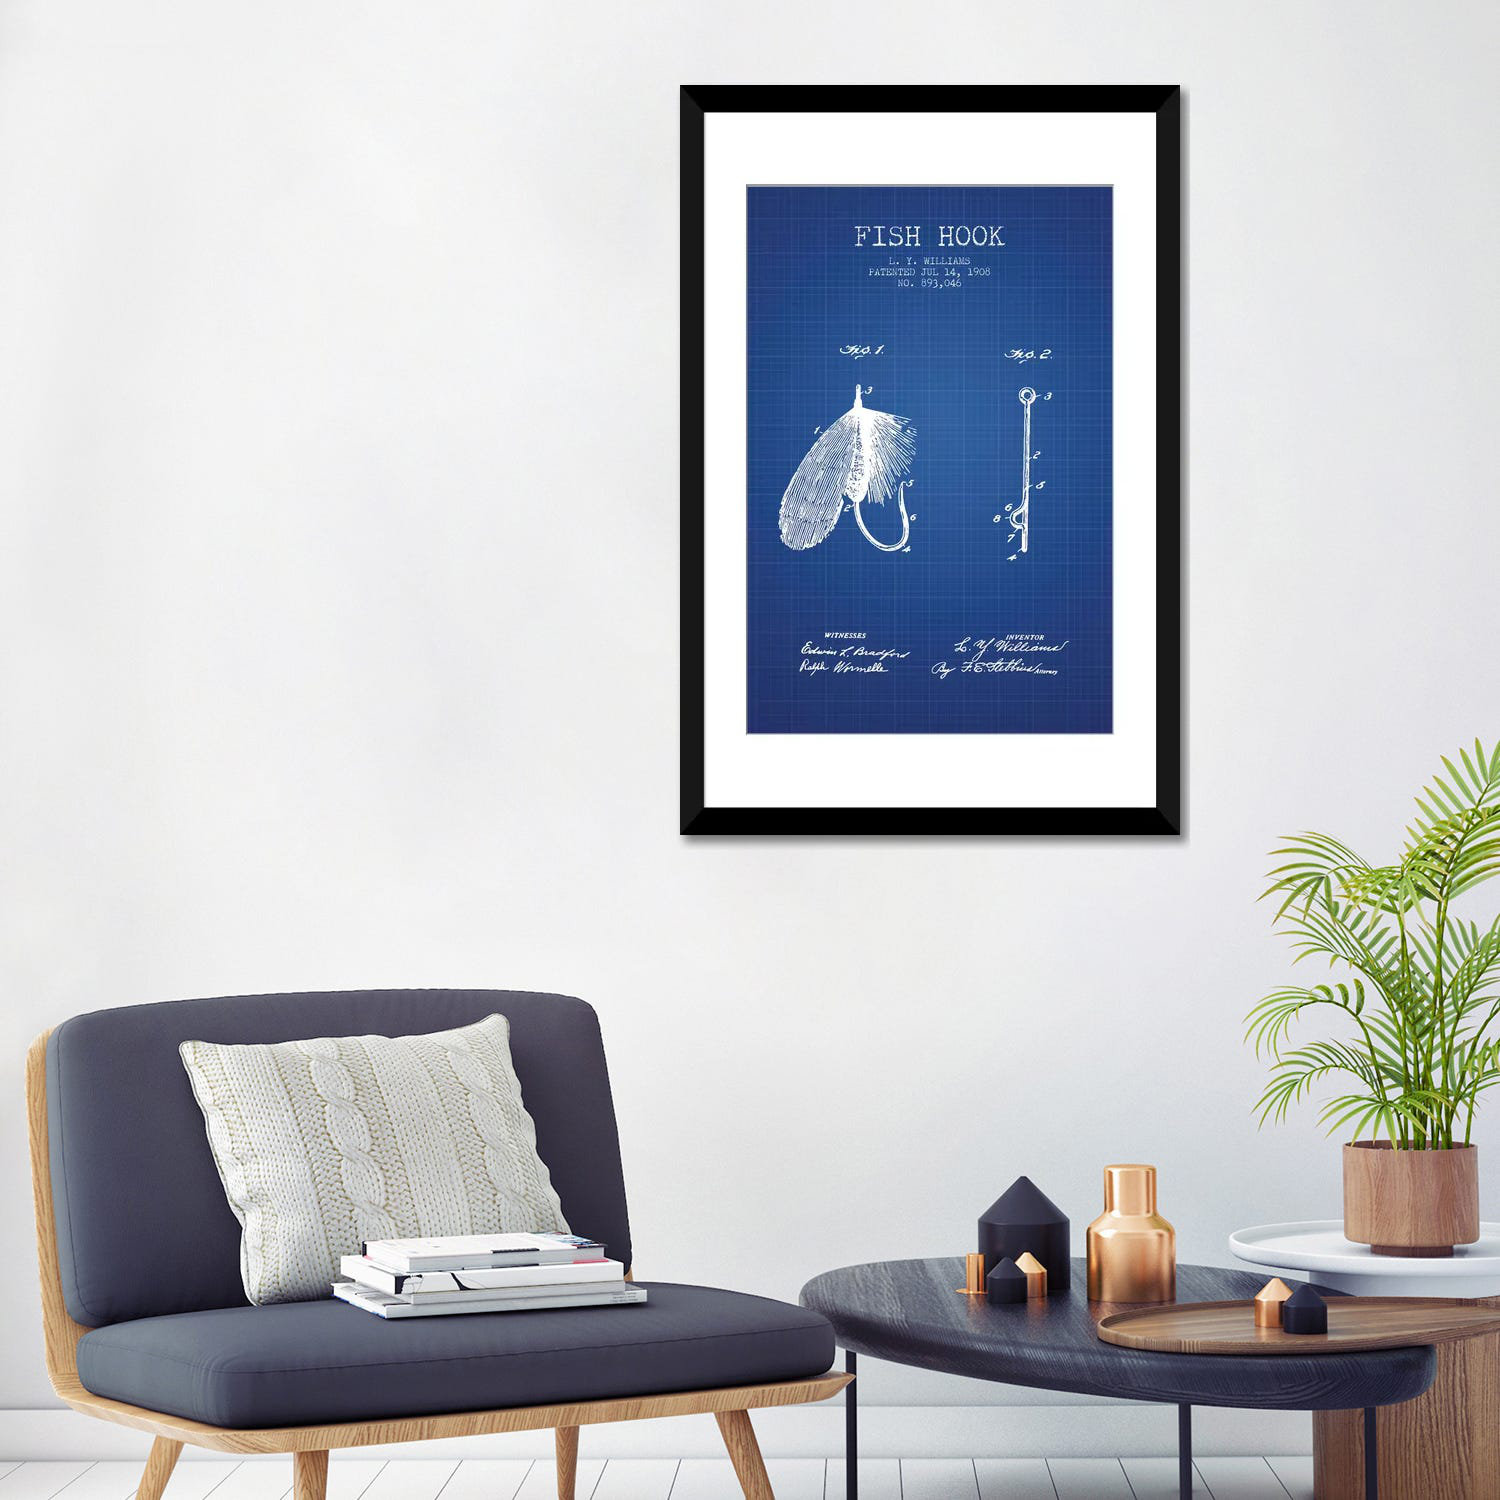 L.Y. Williams Fish Hook Patent Sketch' Graphic Art Print On Canvas in Blue Grid East Urban Home Size: 24 H x 16 W x 1 D, Format: Black Framed Fine